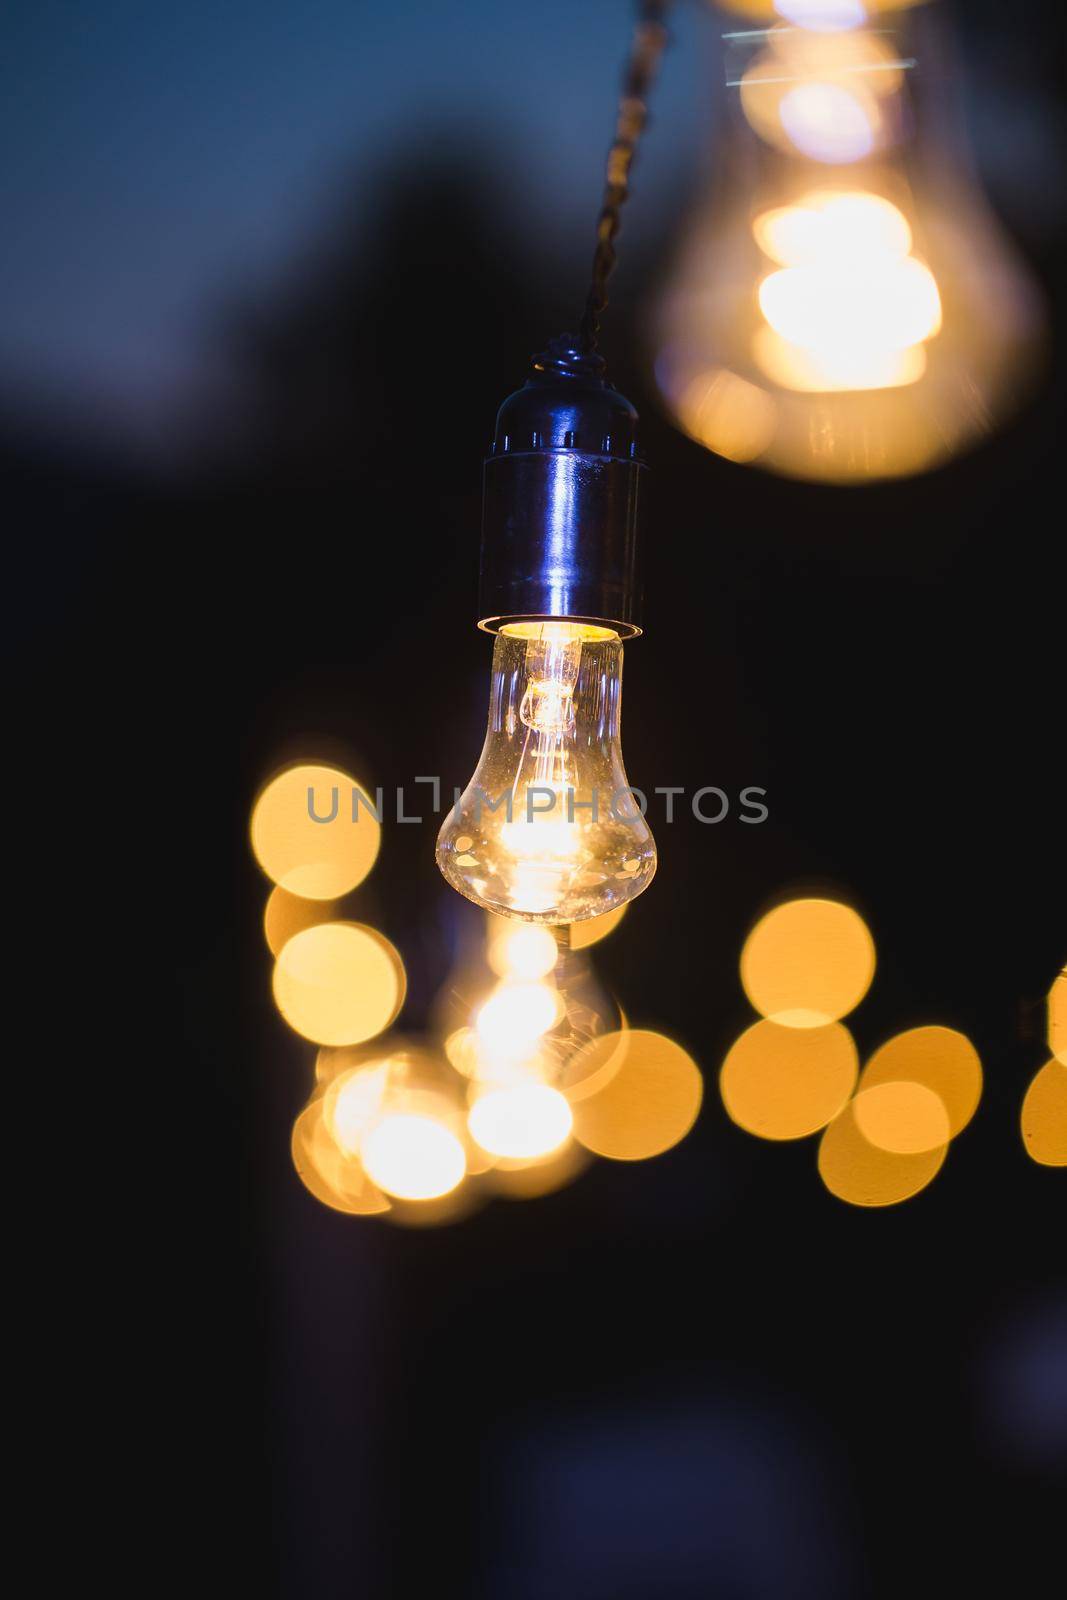 Light bulb decor in outdoor party. Evening wedding ceremony